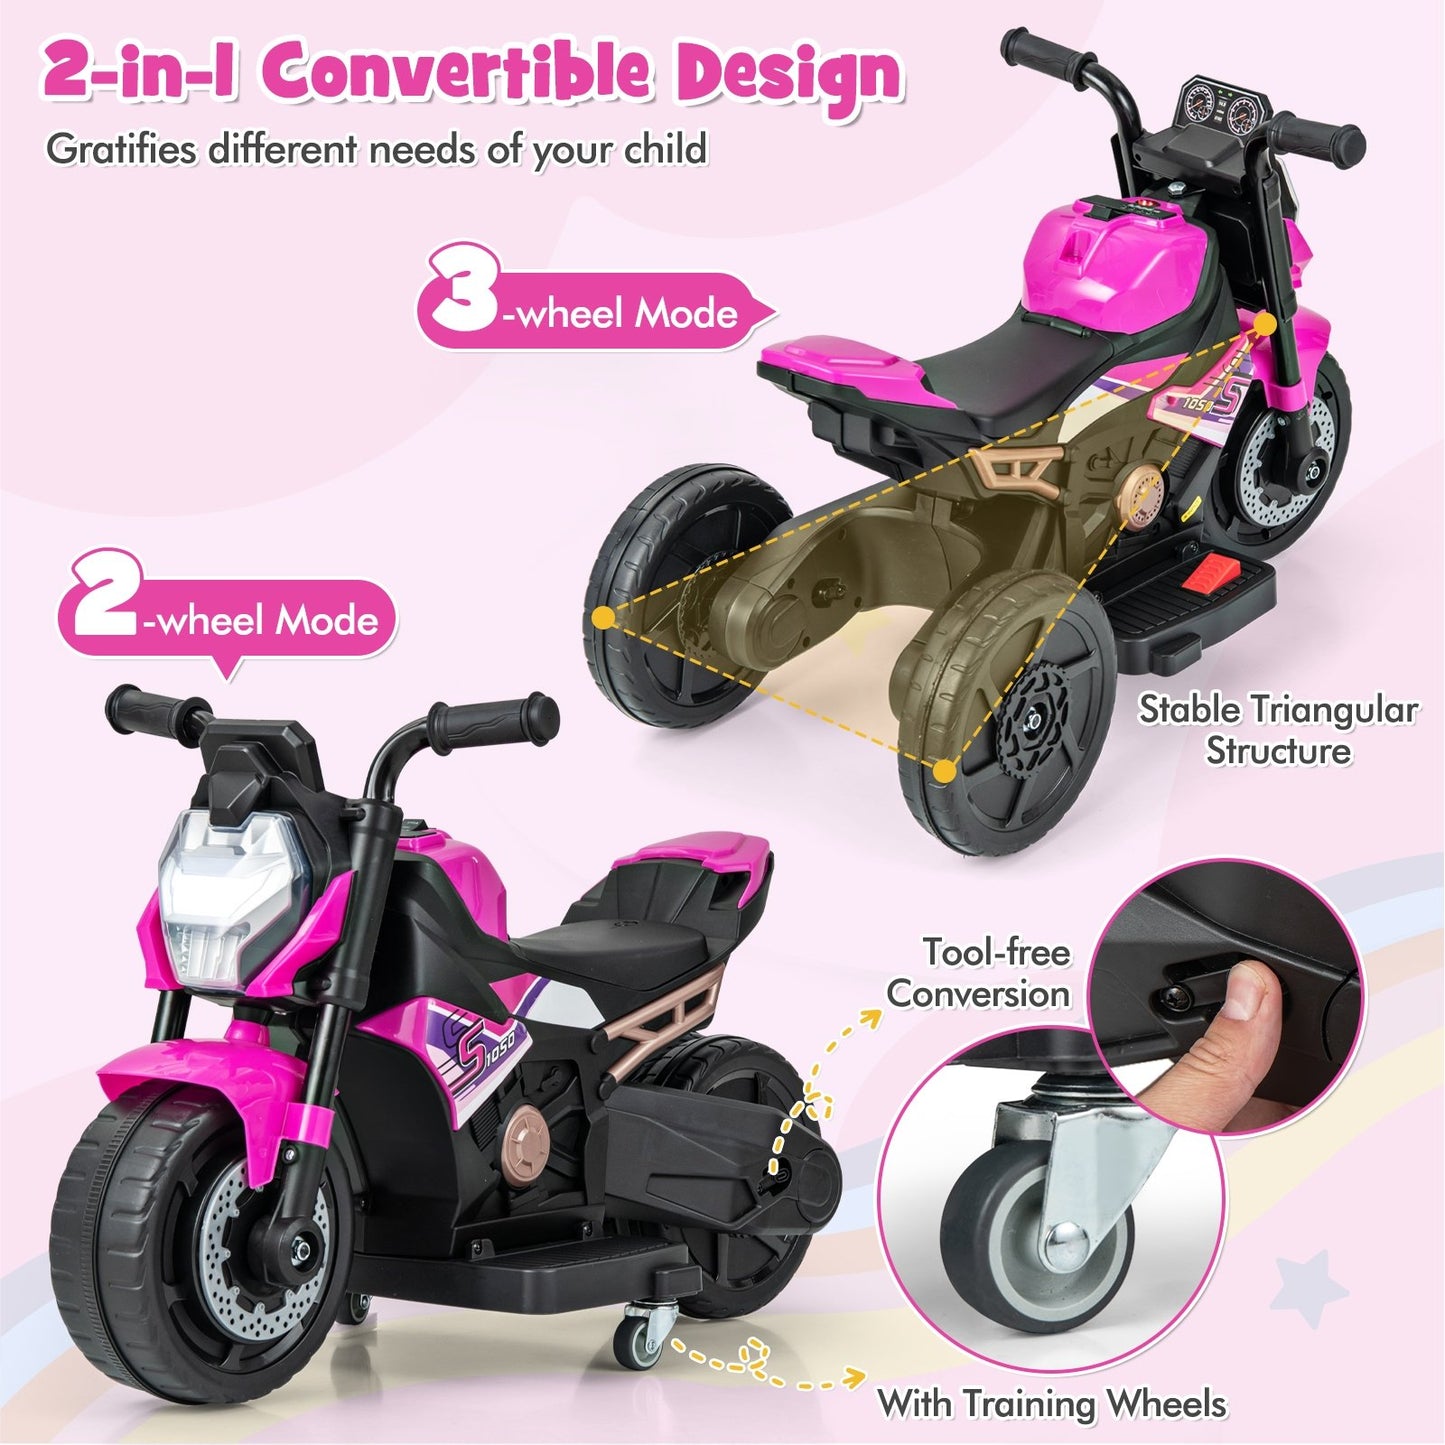 Kids Ride-on Motorcycle 6V Battery Powered Motorbike with Detachable Training Wheels, Pink